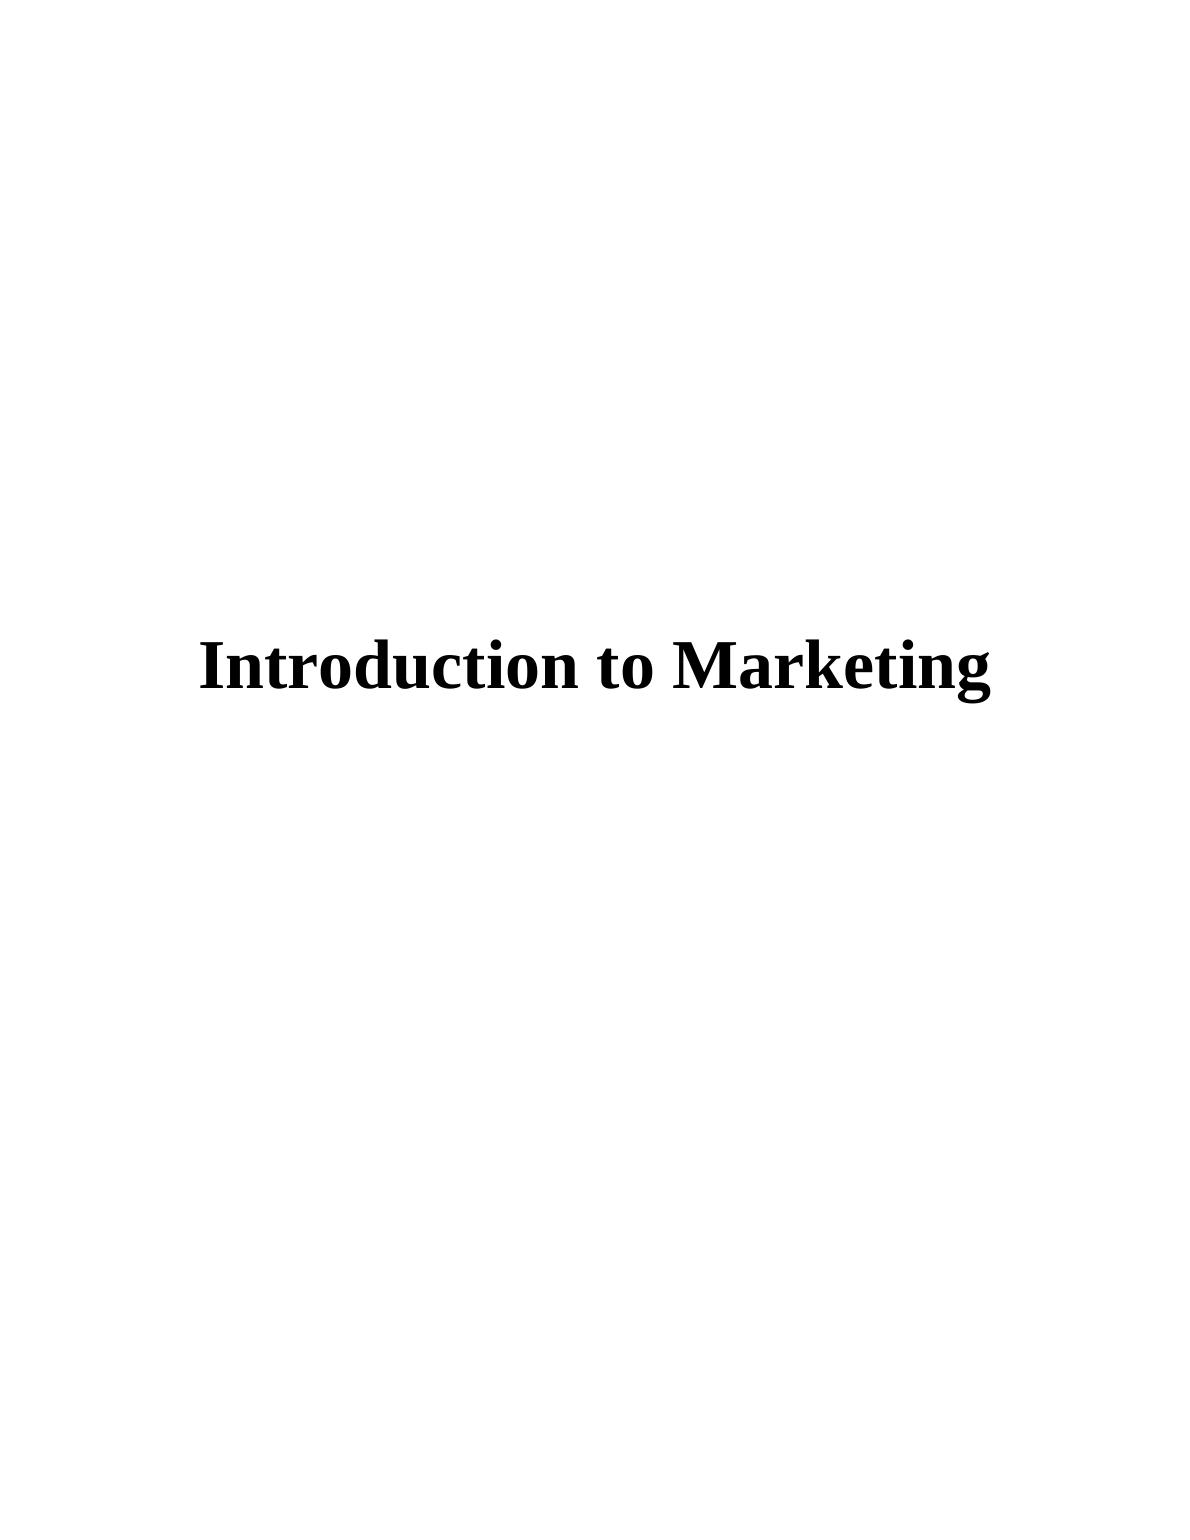 Marketing Strategy Assignment - Tesco and M&S_1